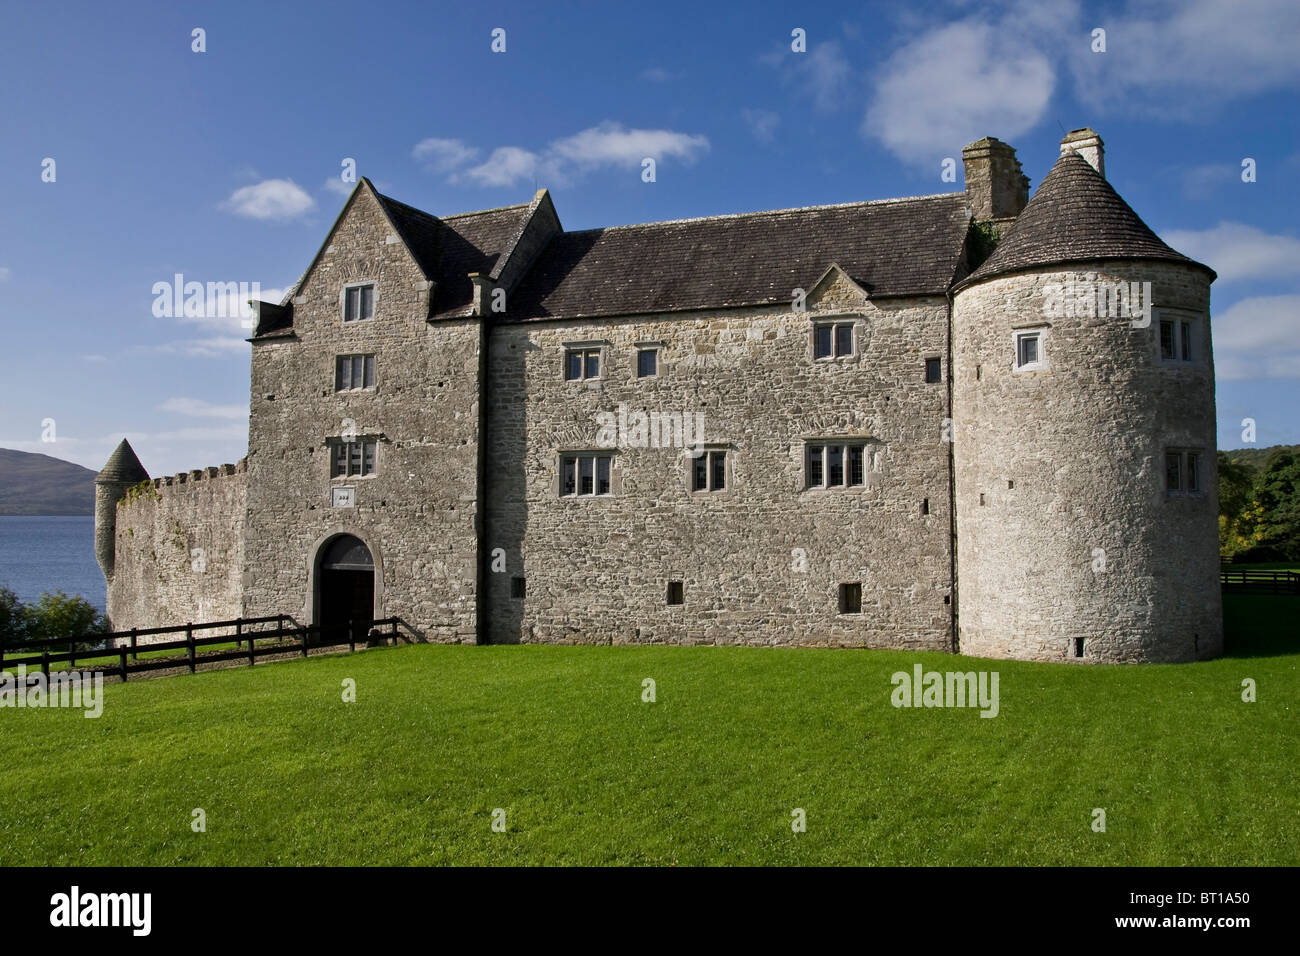 Parkes Castle, Ireland. A 17th century fortified manor house which has recently been restored. Stock Photo